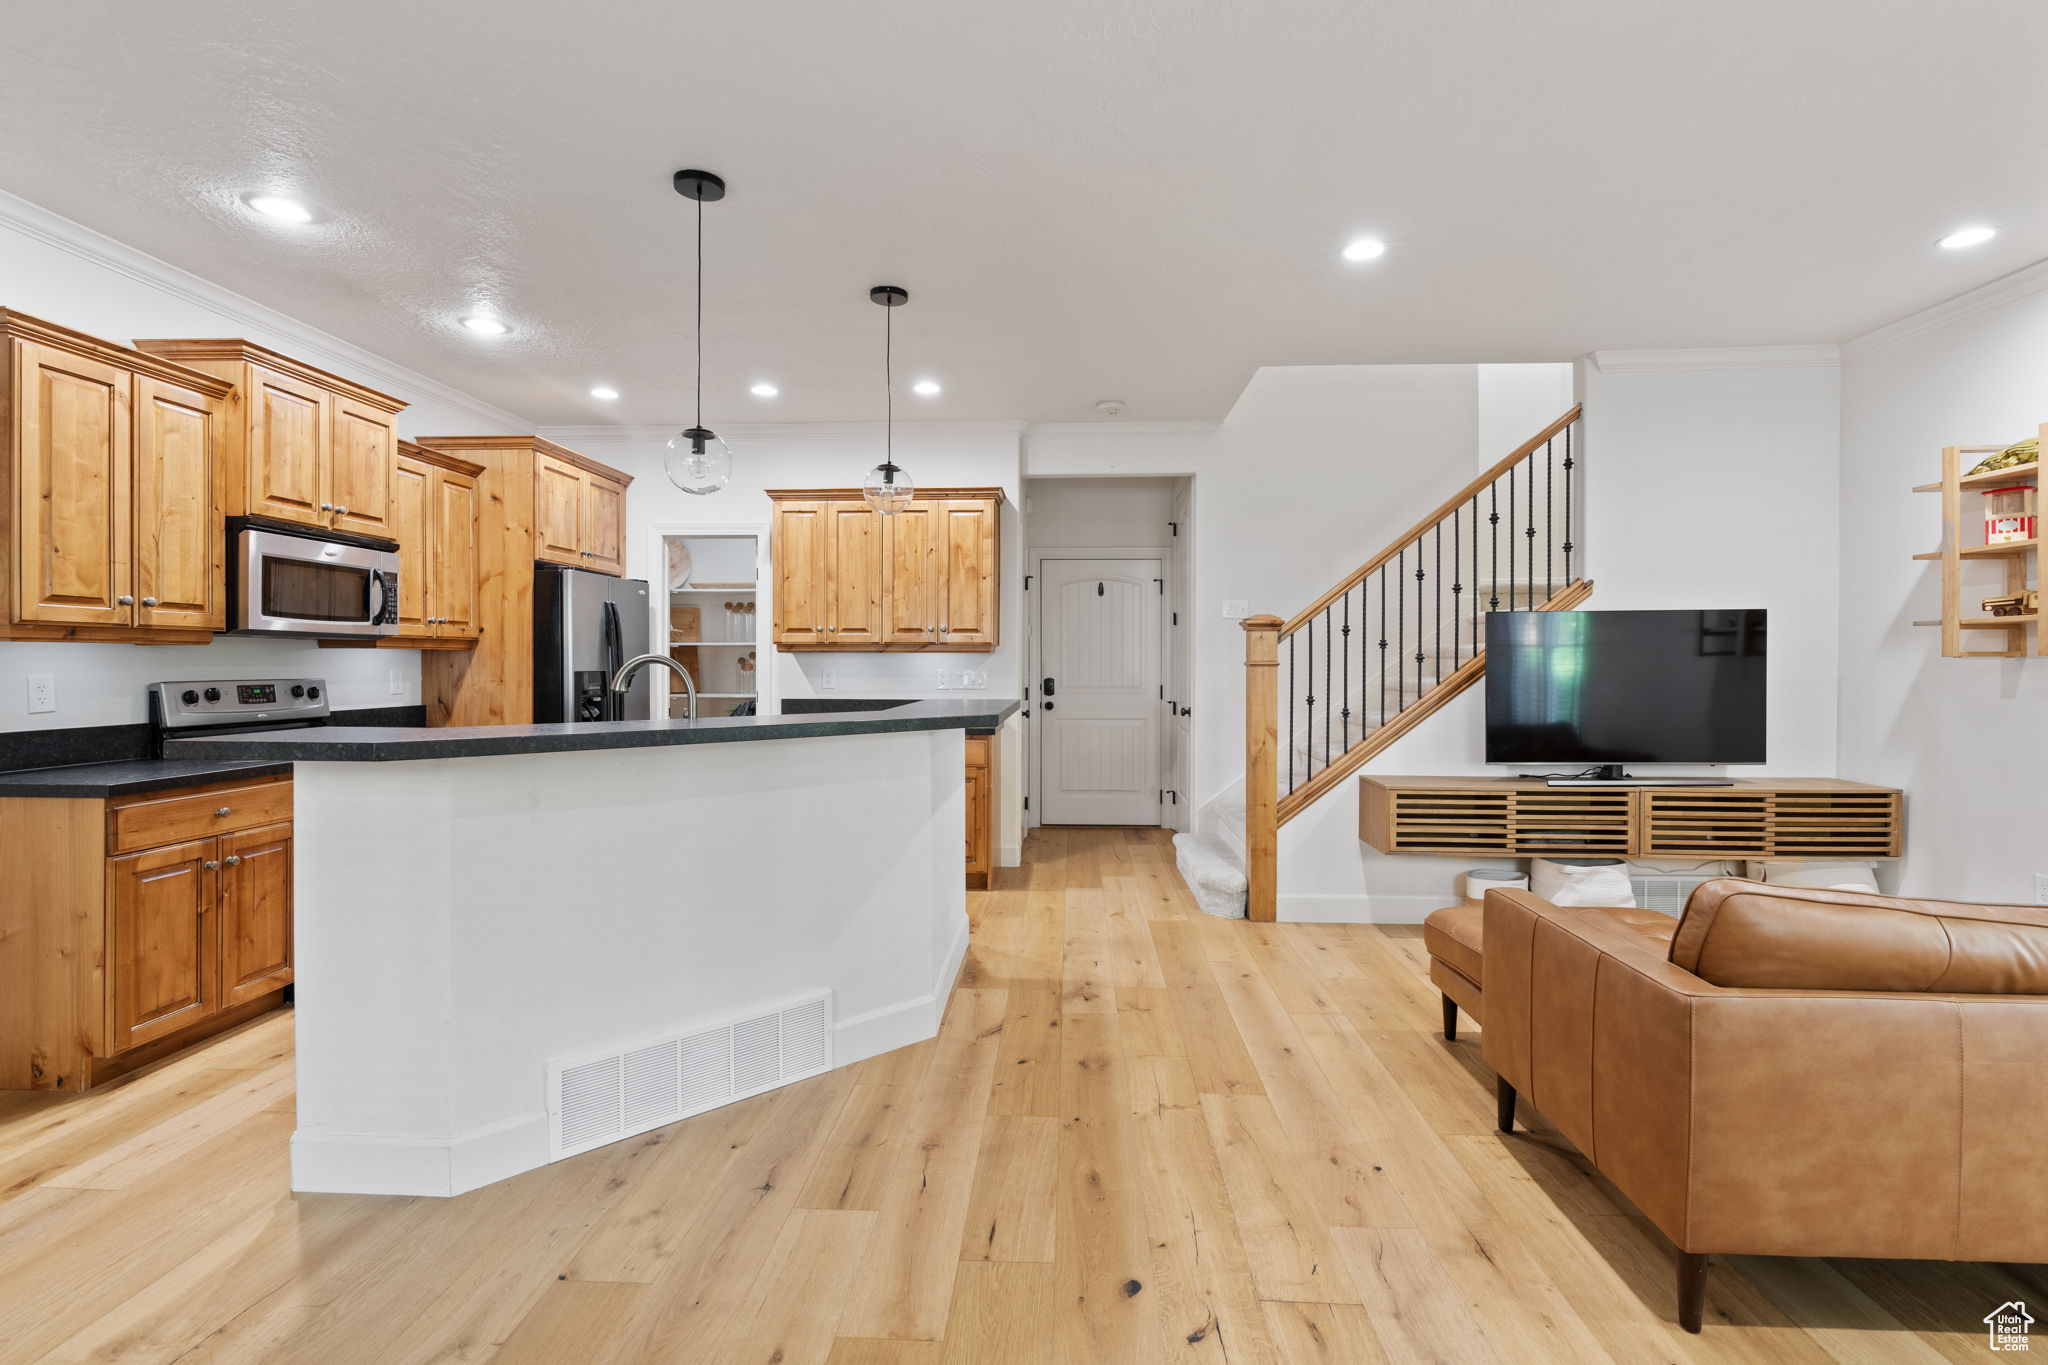 Kitchen with appliances with stainless steel finishes, light hardwood / wood-style flooring, pendant lighting, and crown molding